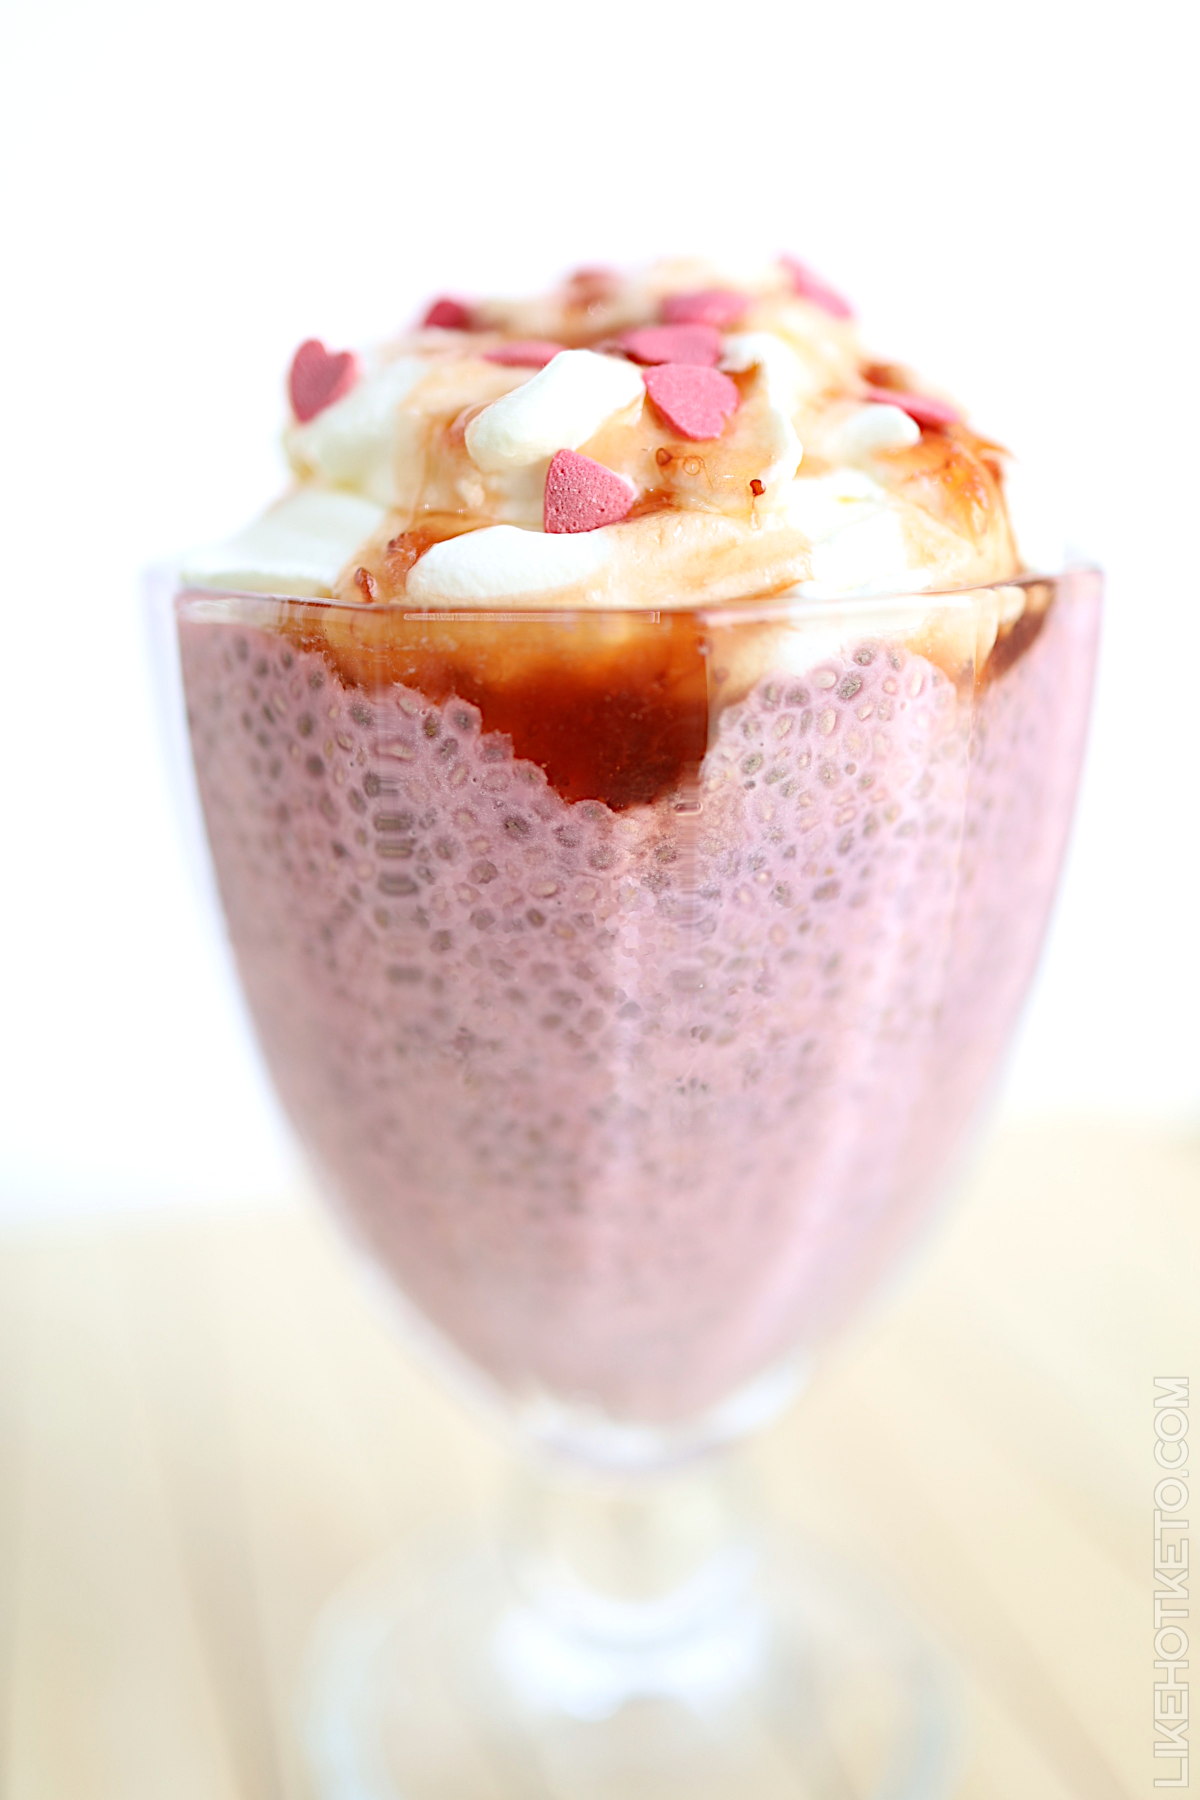 Strawberry pink keto chia pudding with whipped cream and heart sprinkles.